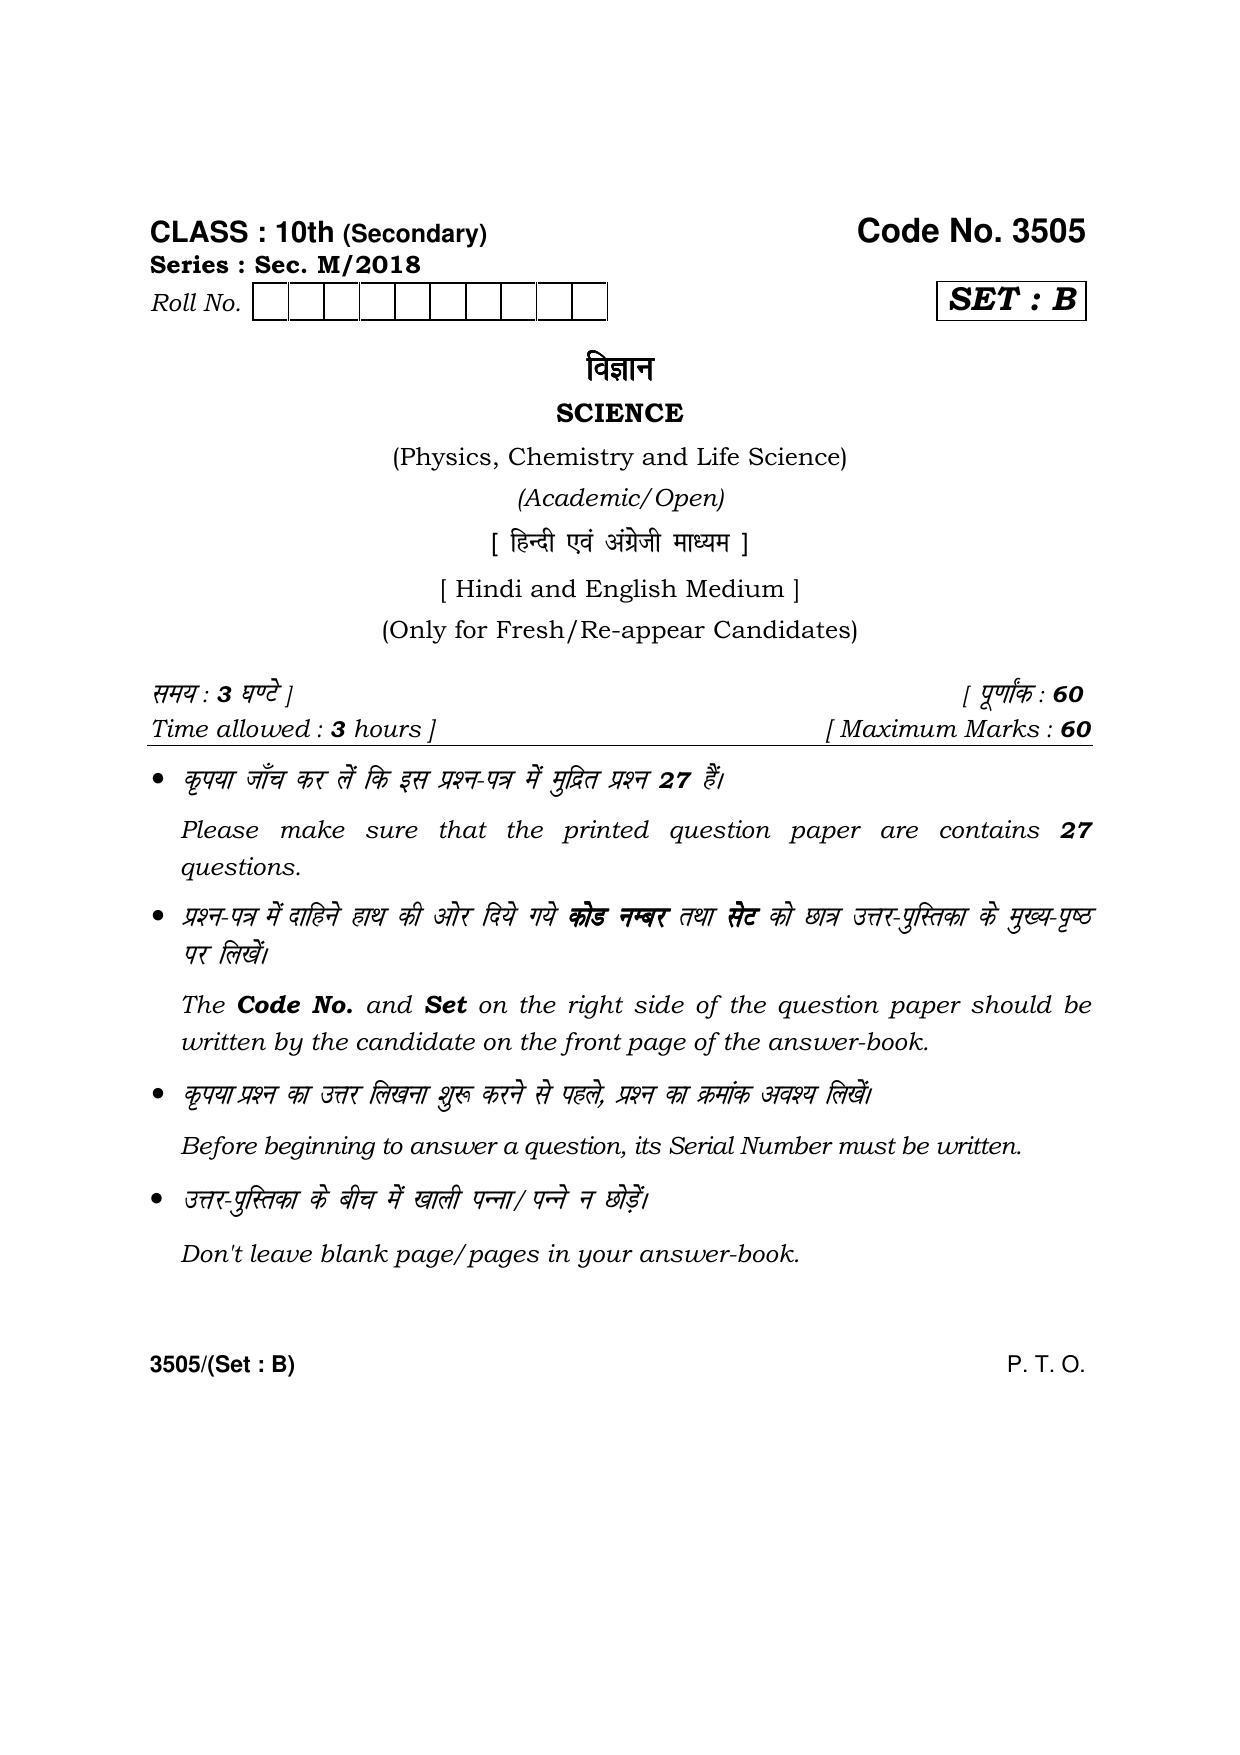 Haryana Board HBSE Class 10 Science -B 2018 Question Paper - Page 1